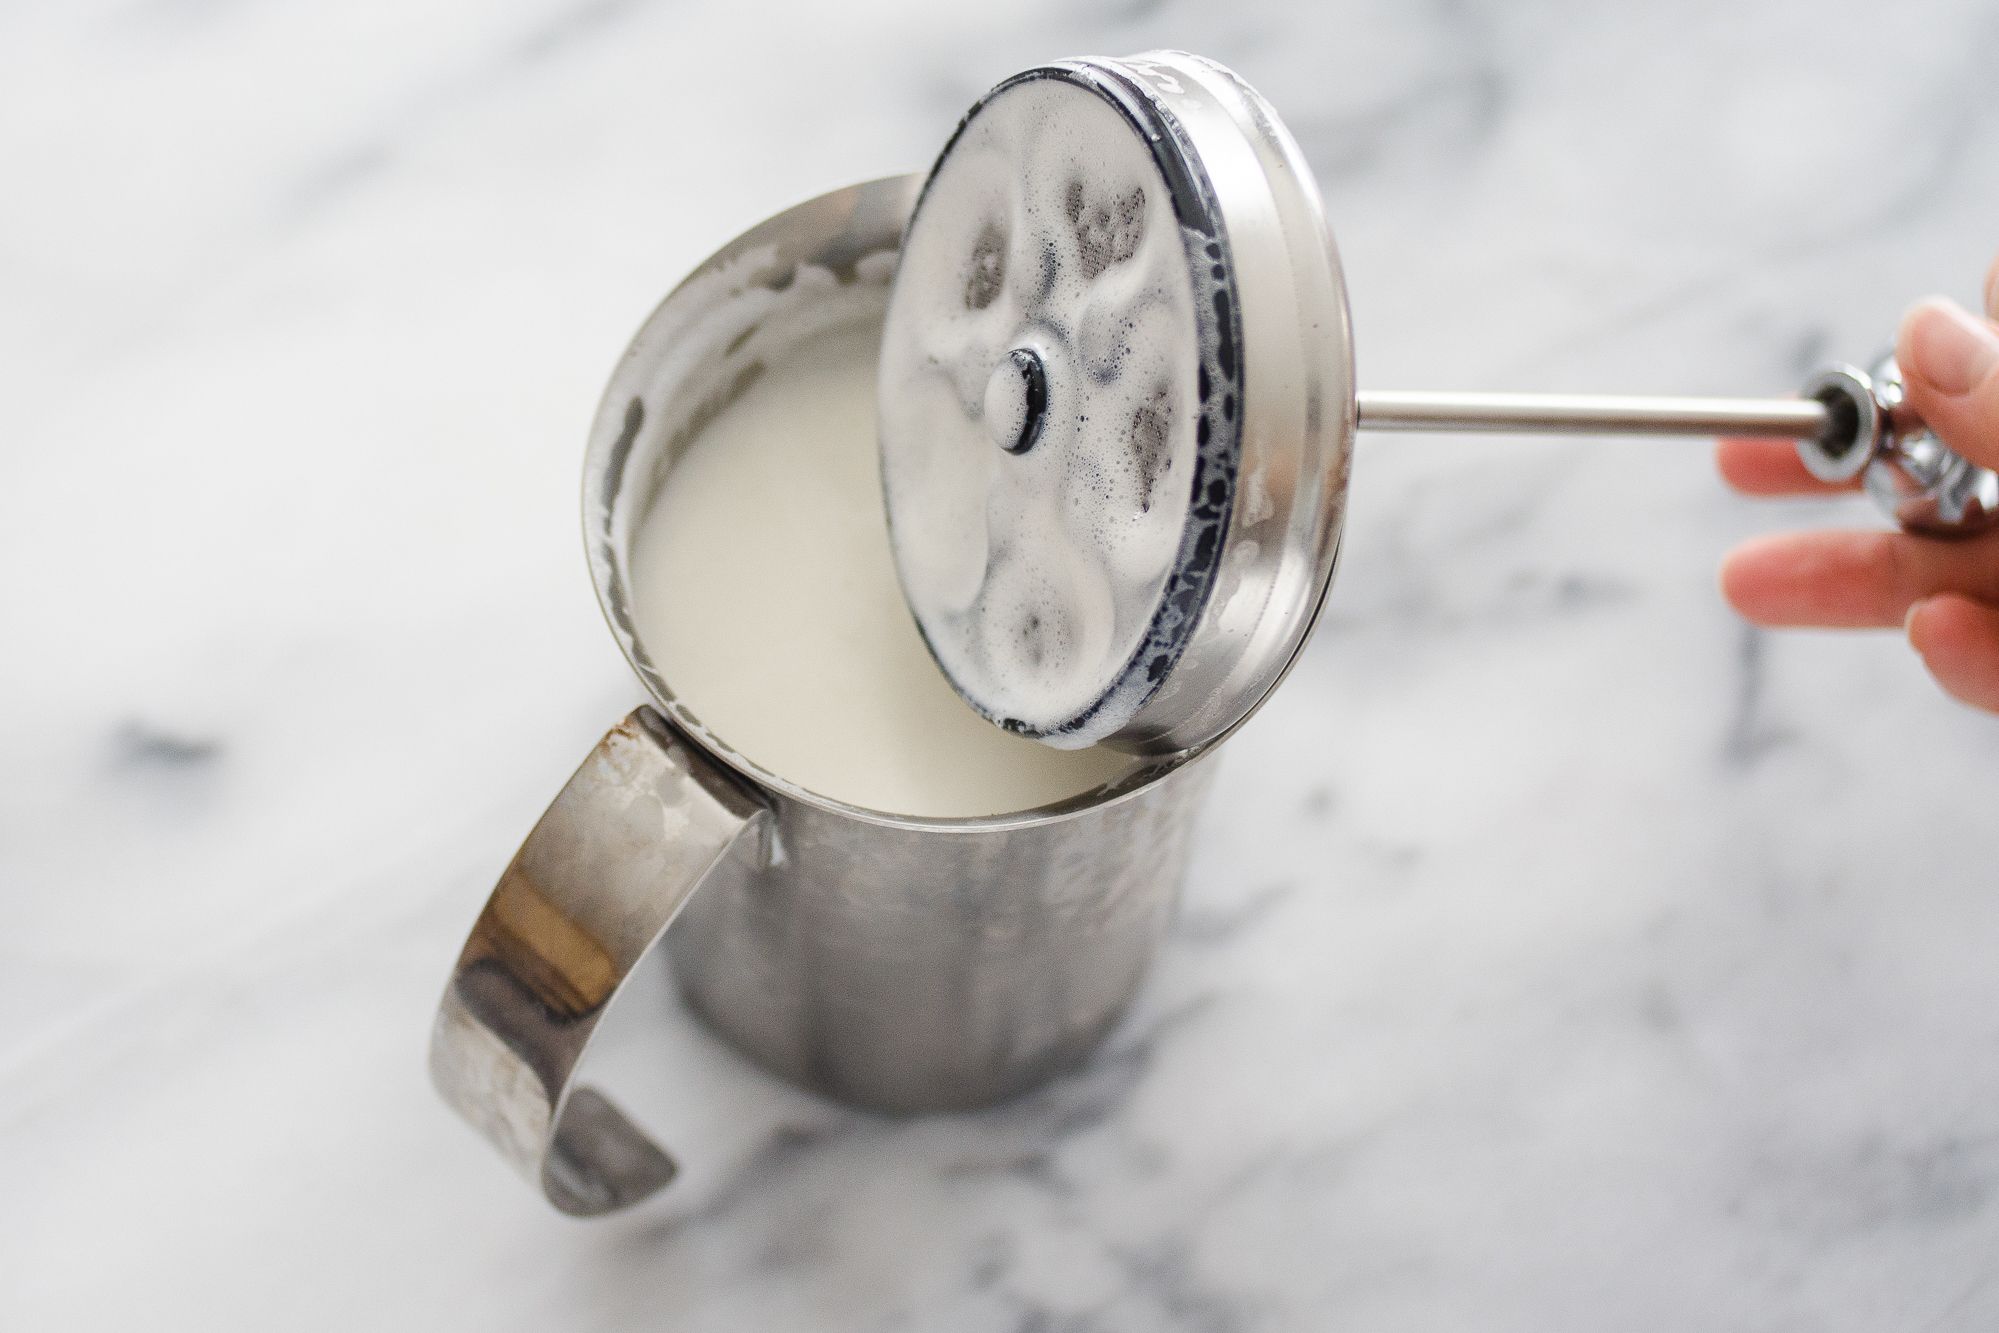 How to Foam Pistachio Milk at Home (No Steamer Necessary) - Táche – TÁCHE